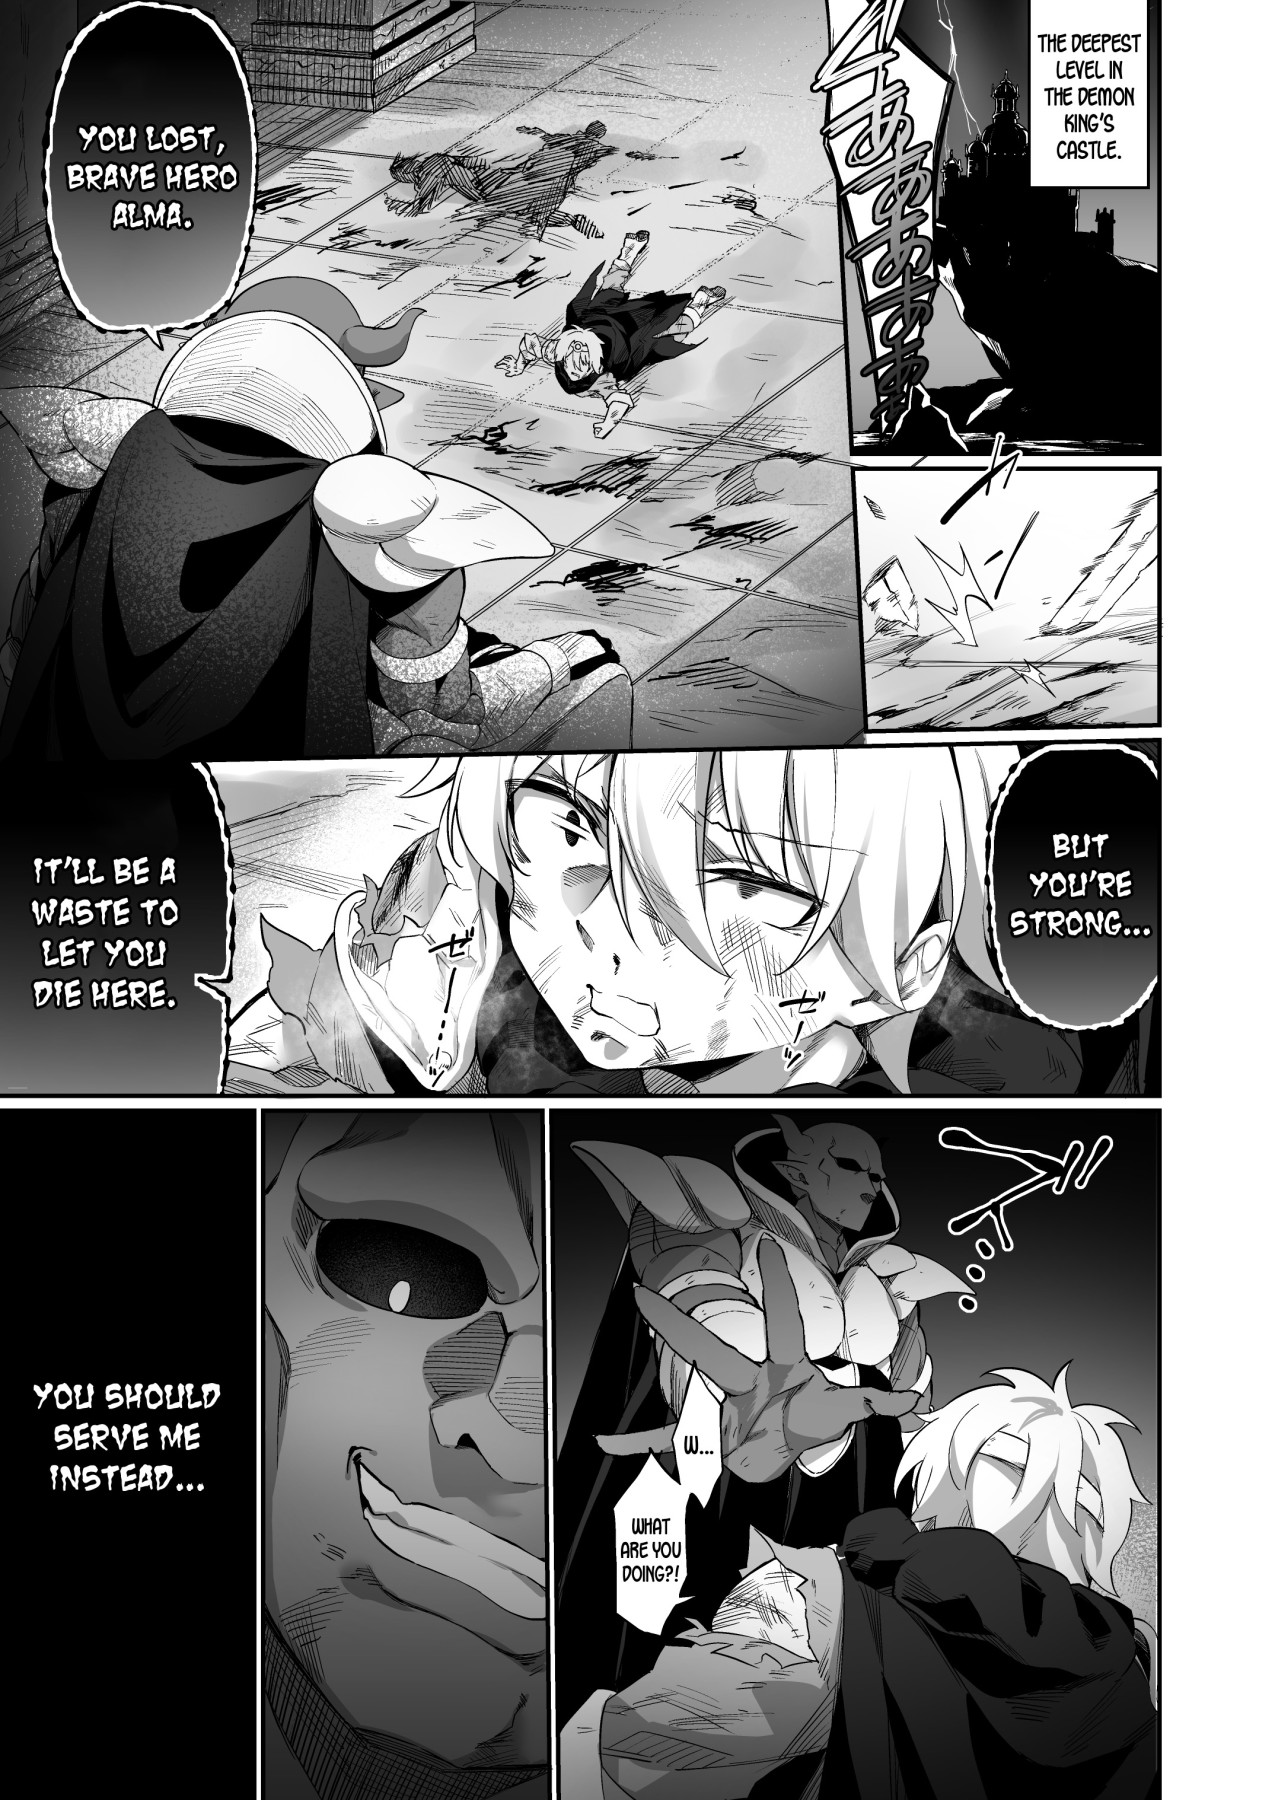 Hentai Manga Comic-A Story Of a Hero Who Lost To The Demon King And Now Has To Live This Life as a Succubus-Read-2